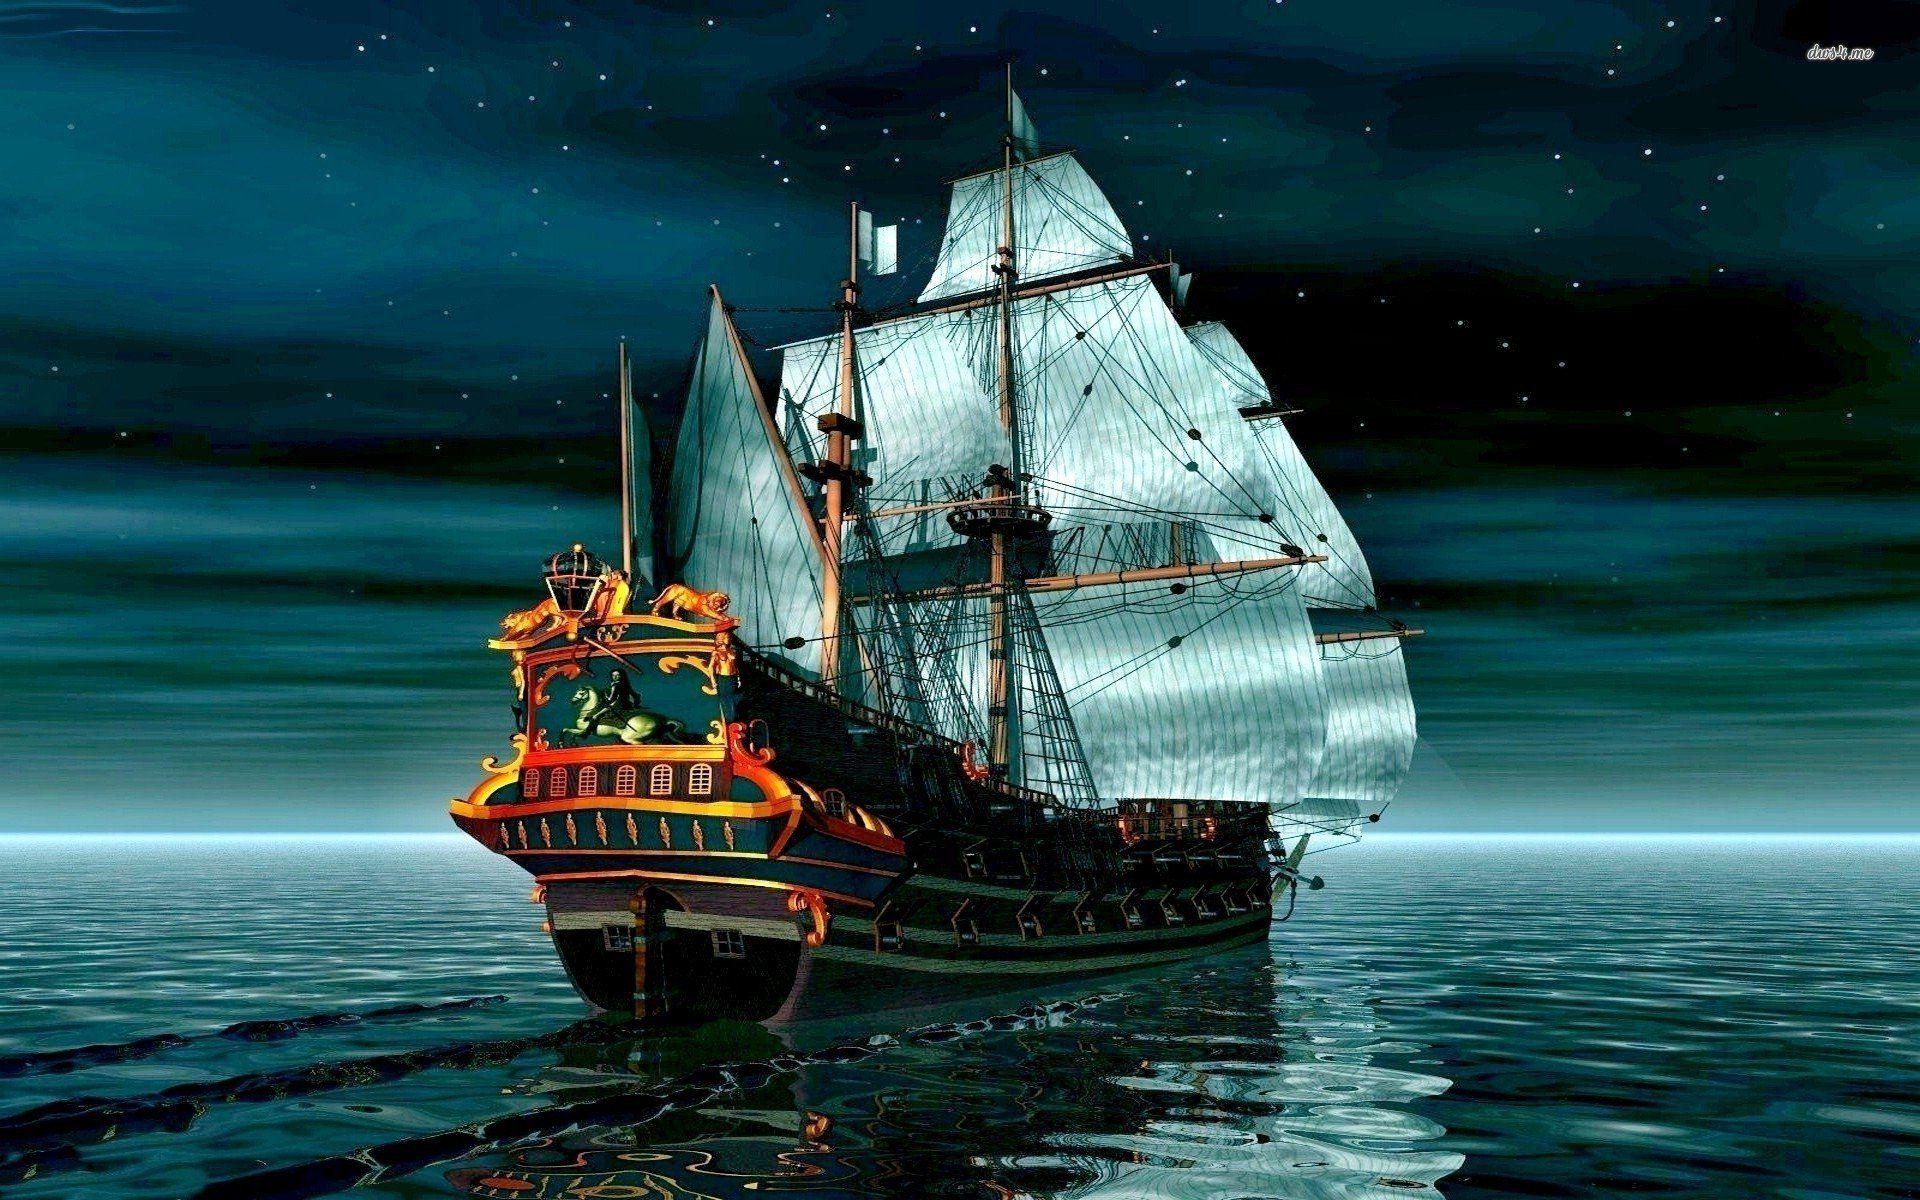 Ghost Pirate Ship Image. Ghost Ships Pirate Ships